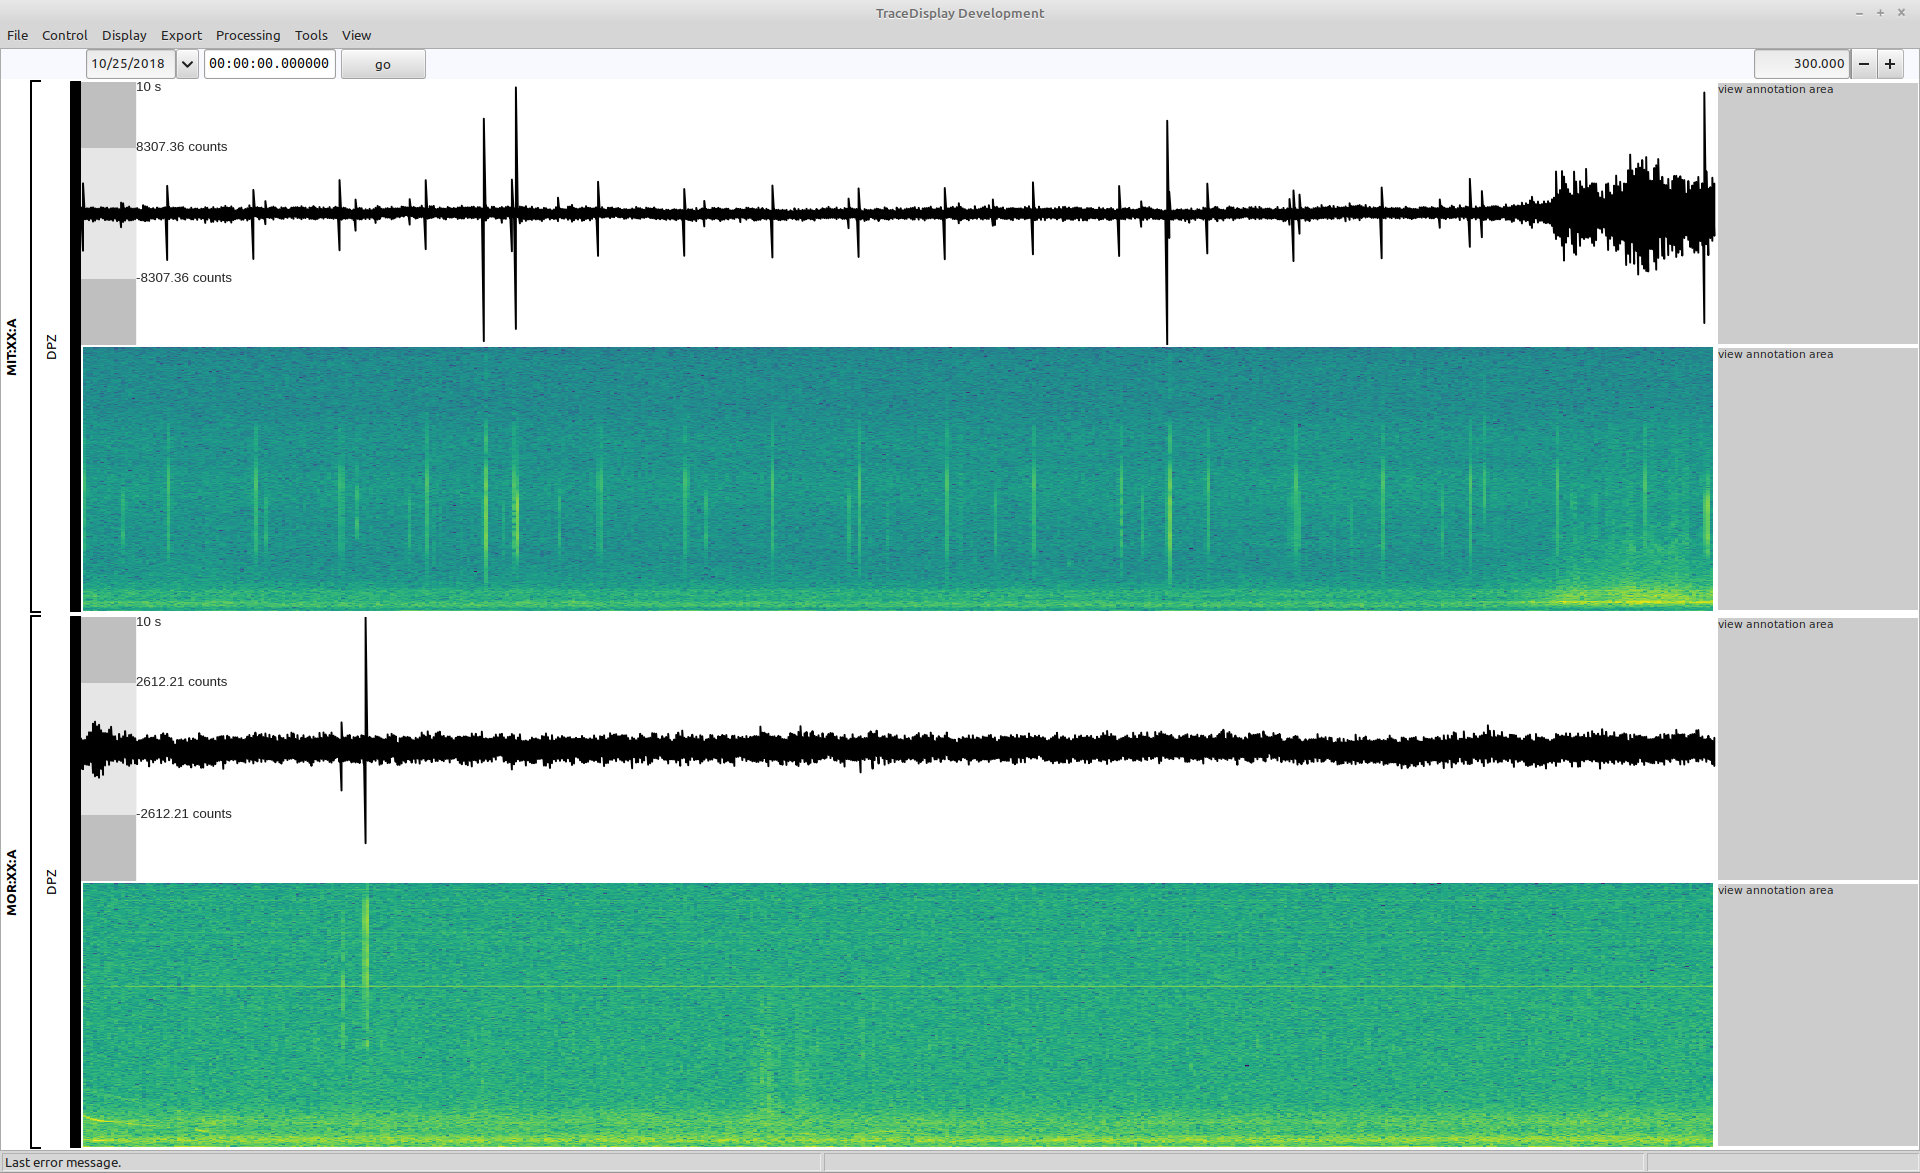 The tracedisplay dialog with the spectrogram view added.